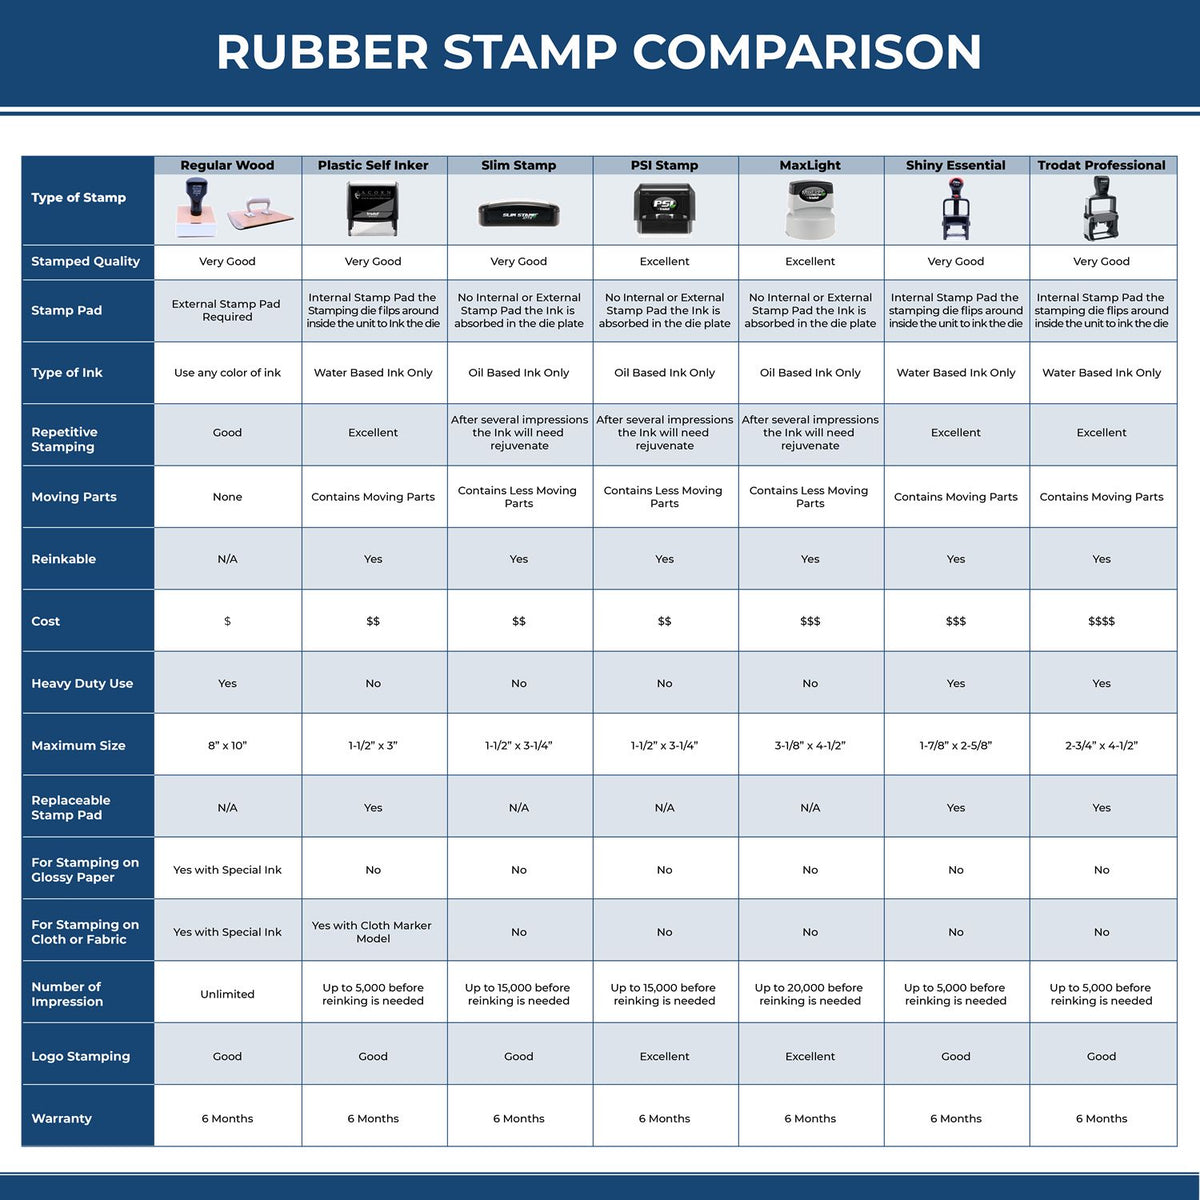 Insurance Verified Rubber Stamp 4460R Rubber Stamp Comparison